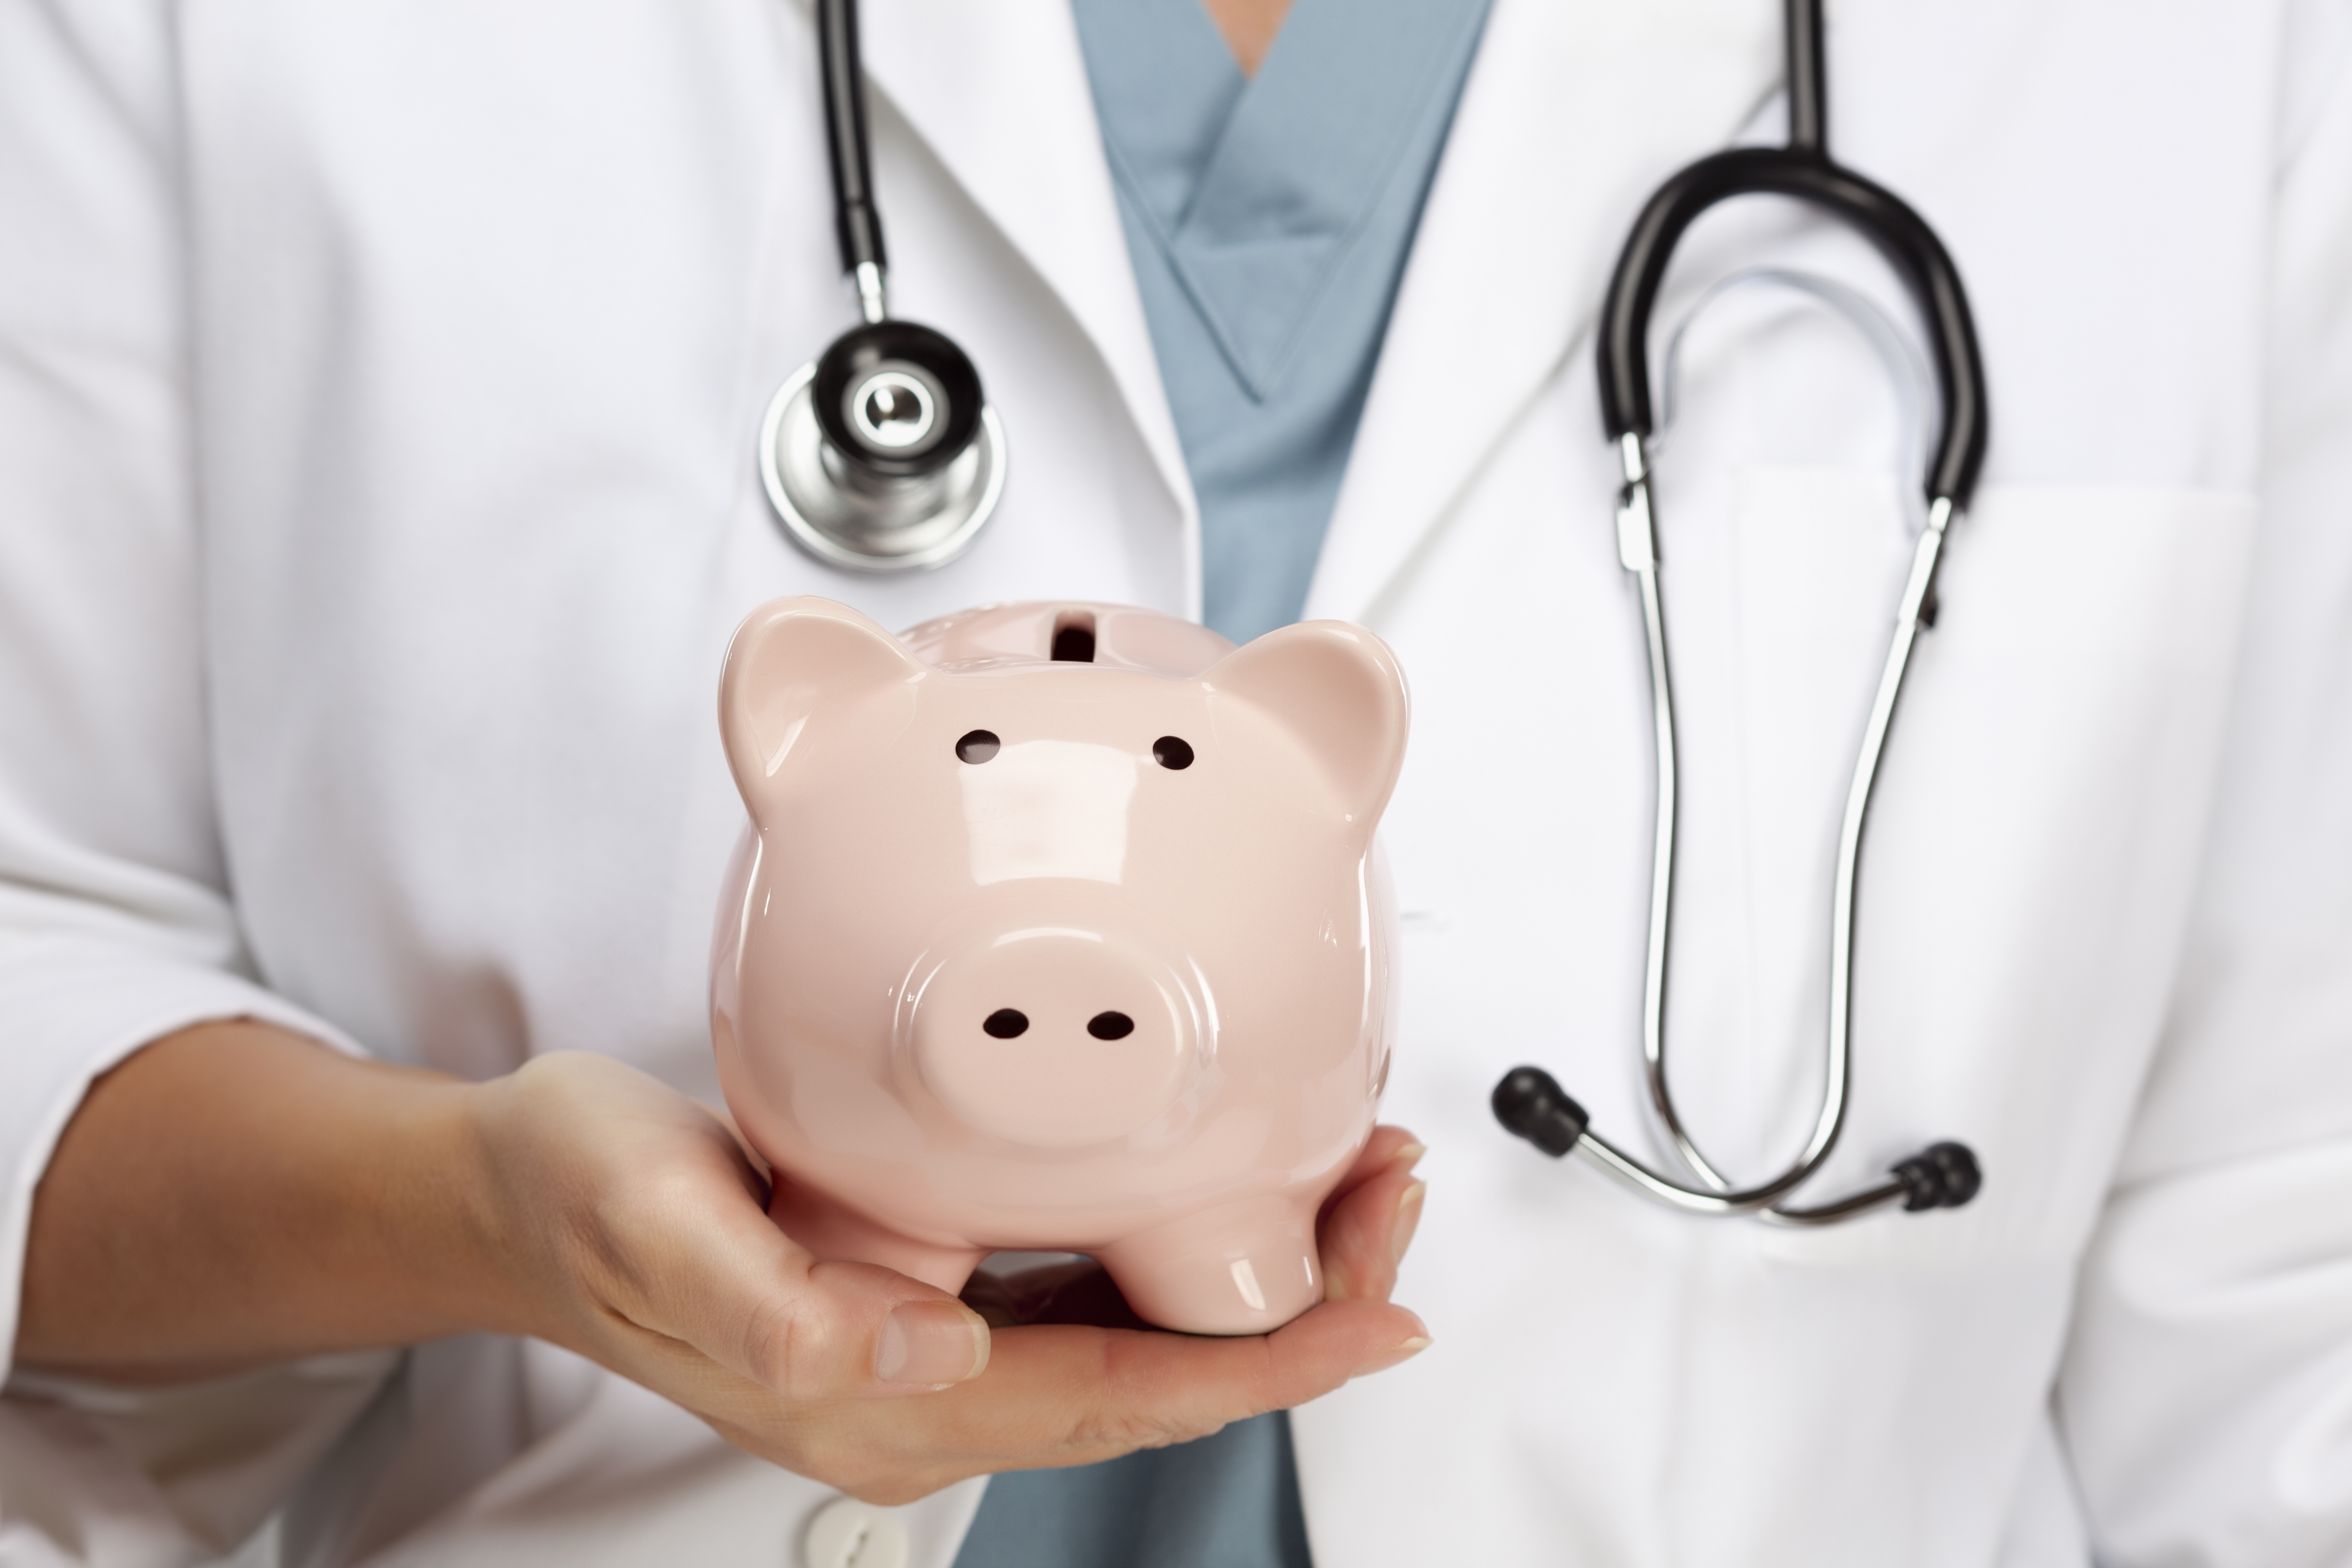 A doctor holds a piggy bank. Shutterstock image via Andy Dean Photography